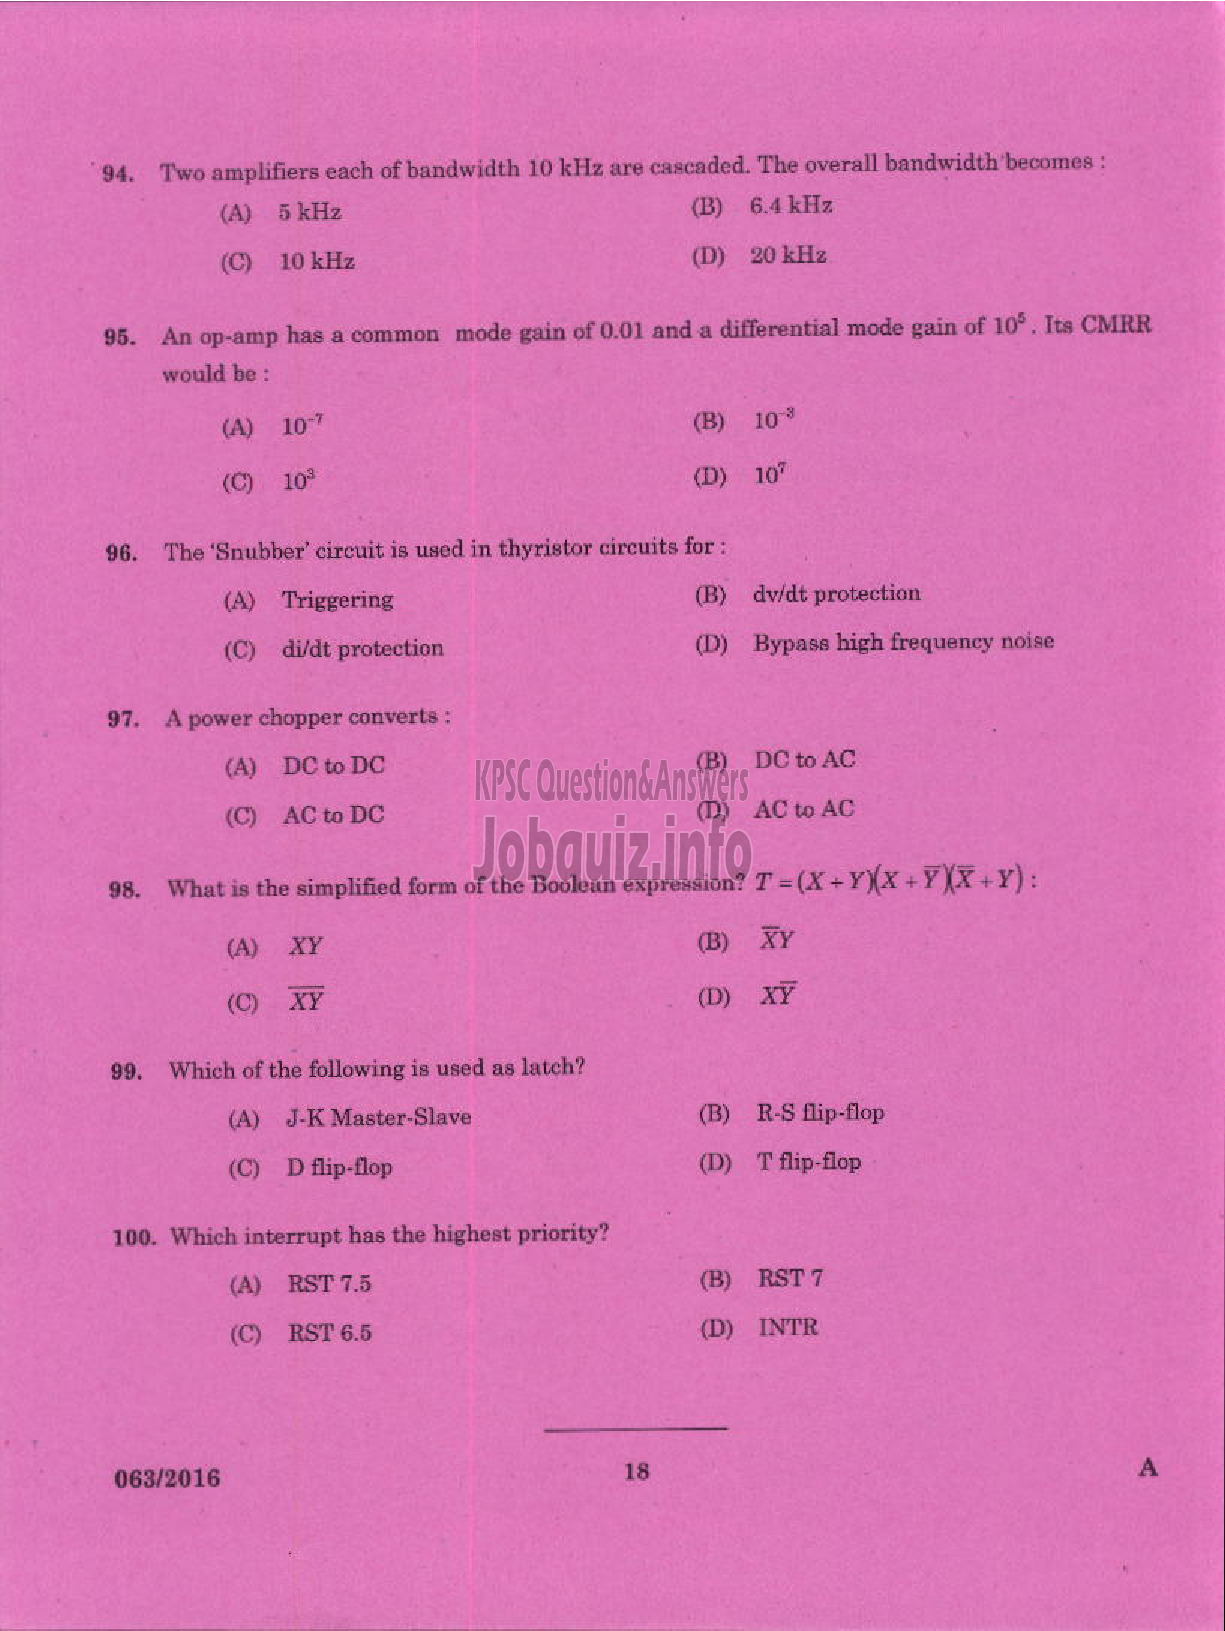 Kerala PSC Question Paper - ASSISTANT PROFESSOR IN ELECTRICAL AND ELECTRONICS ENGINEERING TECHNICAL EDUCATION ENGINEERING COLLEGES-16